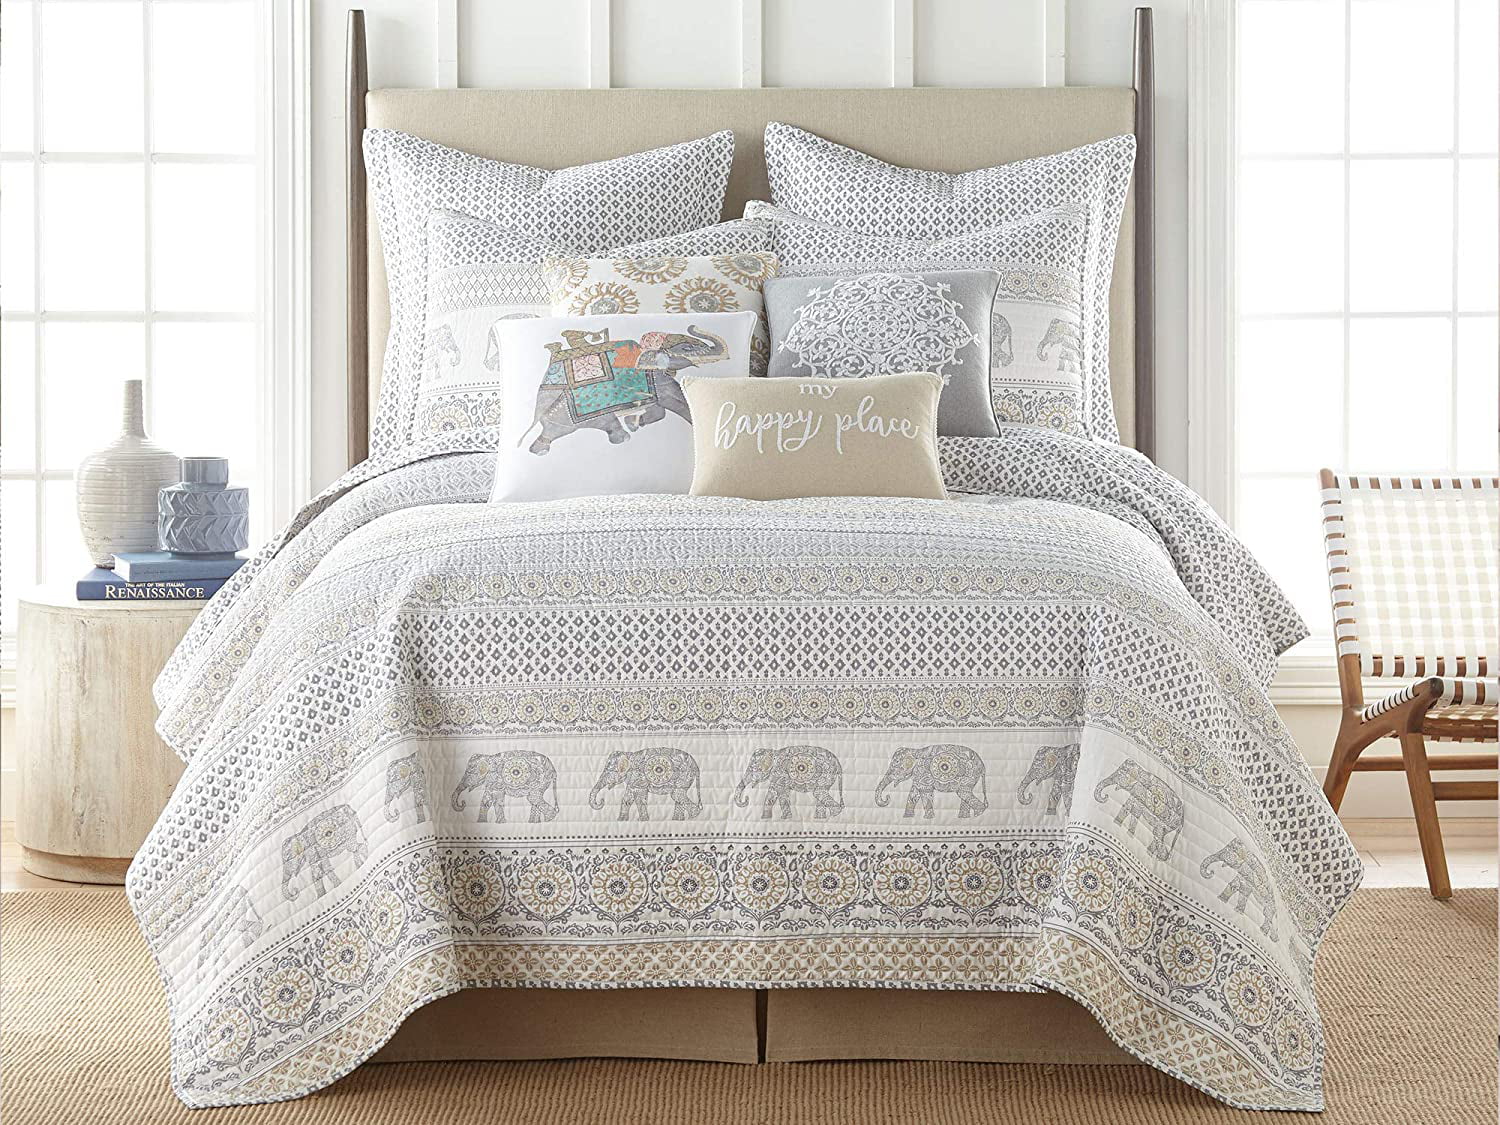 Elephant Quilted Bedspread & Pillow Shams Set Walking Down a Road Print 